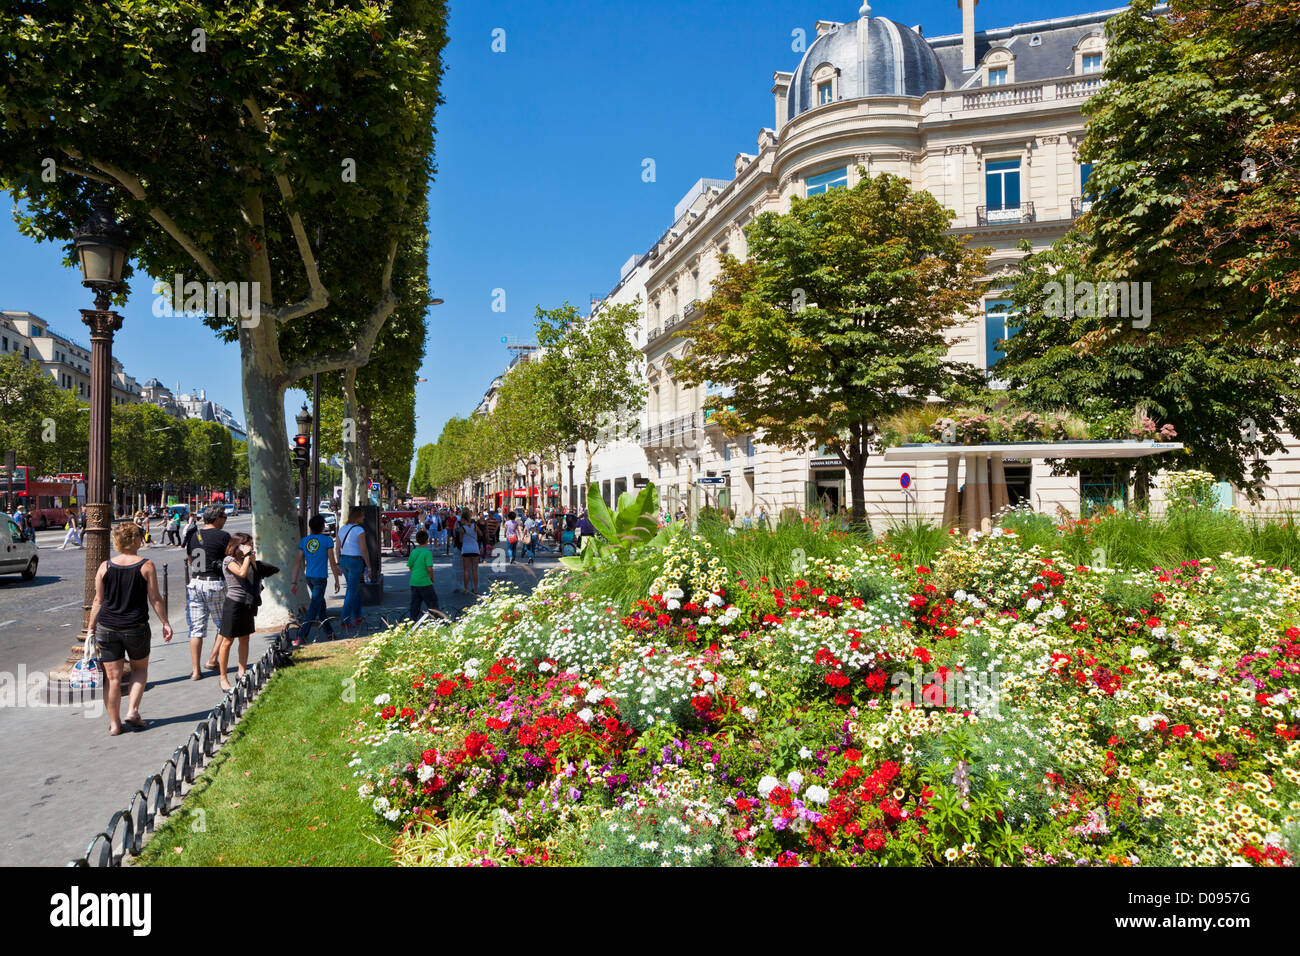 People shopping on the famous street the Avenue des Champs Elysees Paris France EU Europe Stock Photo